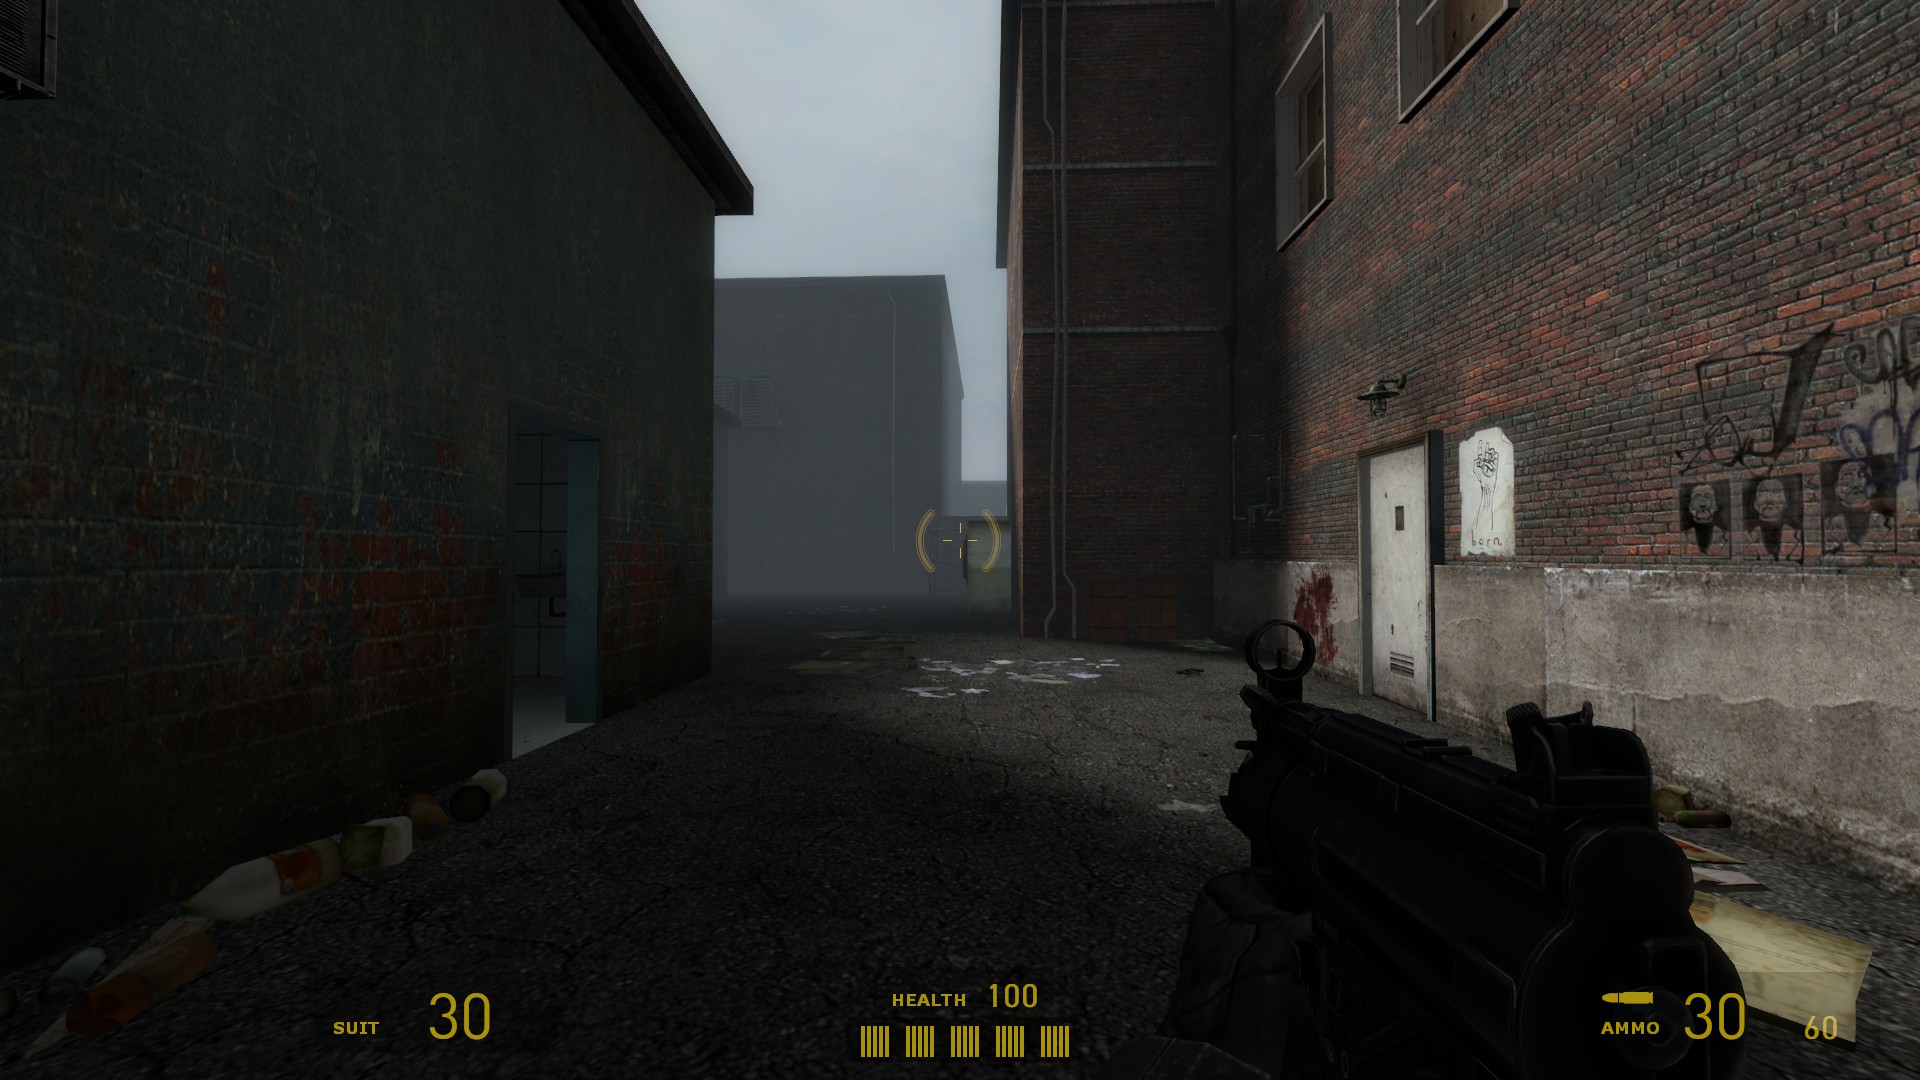 New UI image - Abandon: The Town mod for Half-Life 2: Episode Two - Mod DB1920 x 1080